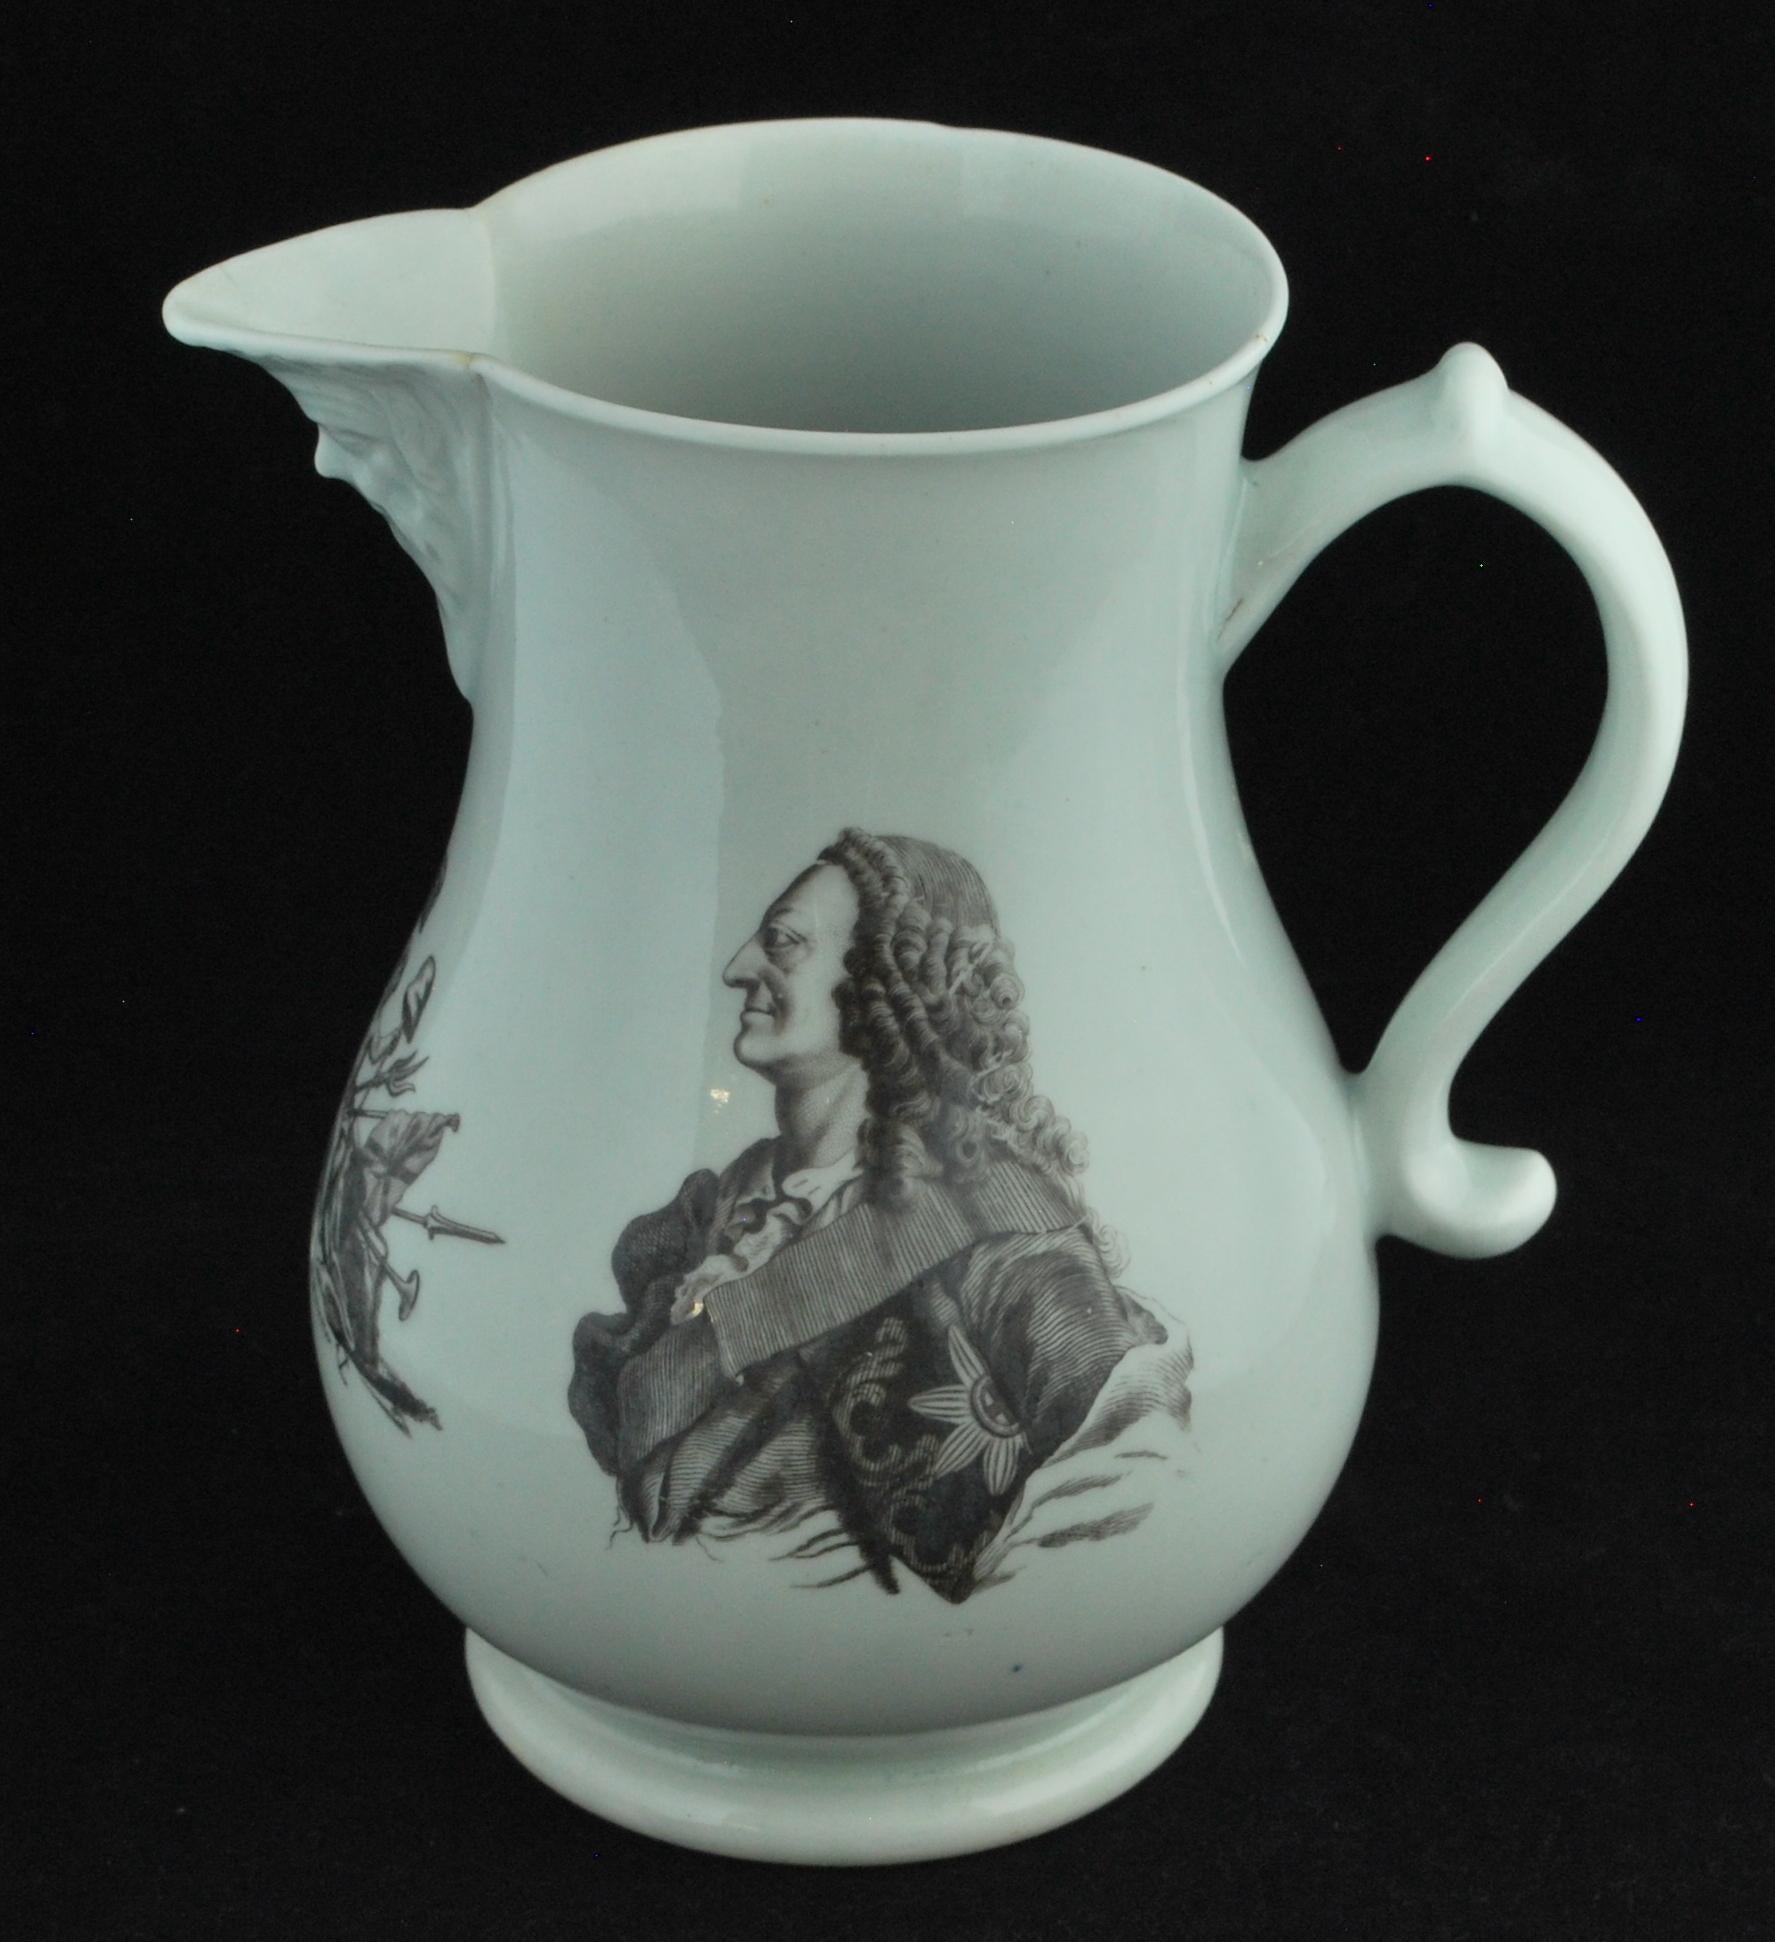 An unusual print, sometimes seen on mugs; exceptionally rare to find it on a jug. King George II died in 1760, and so any Worcester commemoratives of him are scarce. The print commemorates the King’s naval battles, and also has the Worcester mark